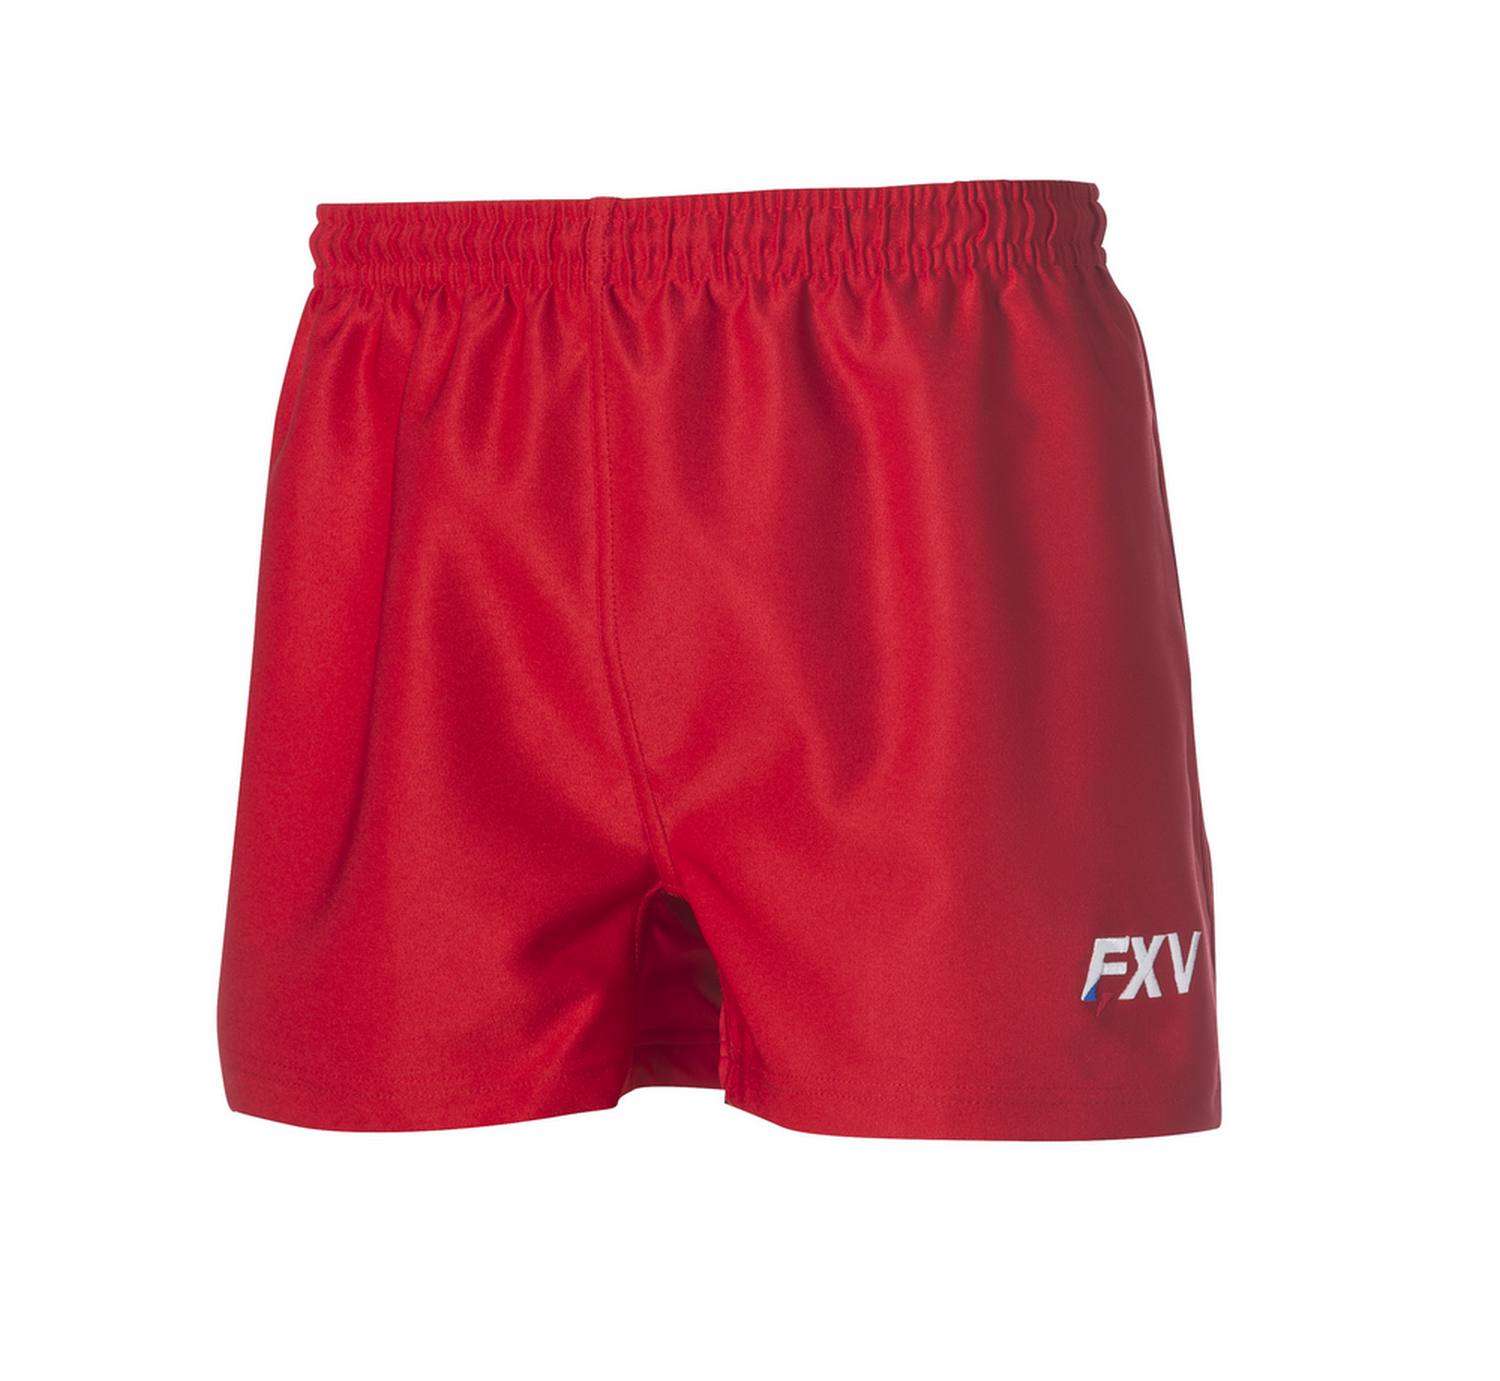 Short de rugby Force XV FORCE rouge